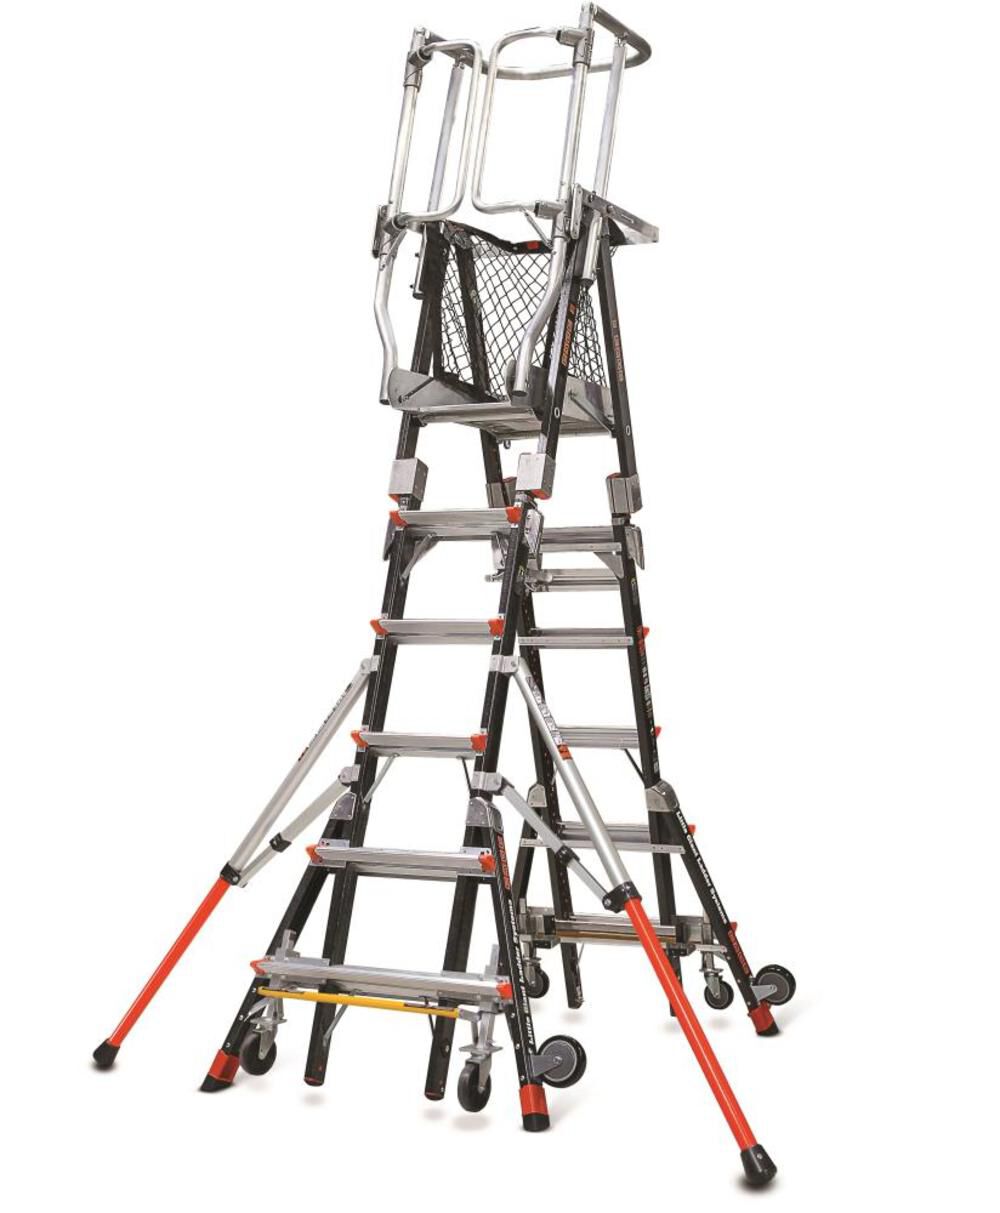 Giant Safety Compact Cage Model 6 Ft. to 10 Ft. IAA FG with Side Tip Wheels and Ratchet Levelers 19506-815